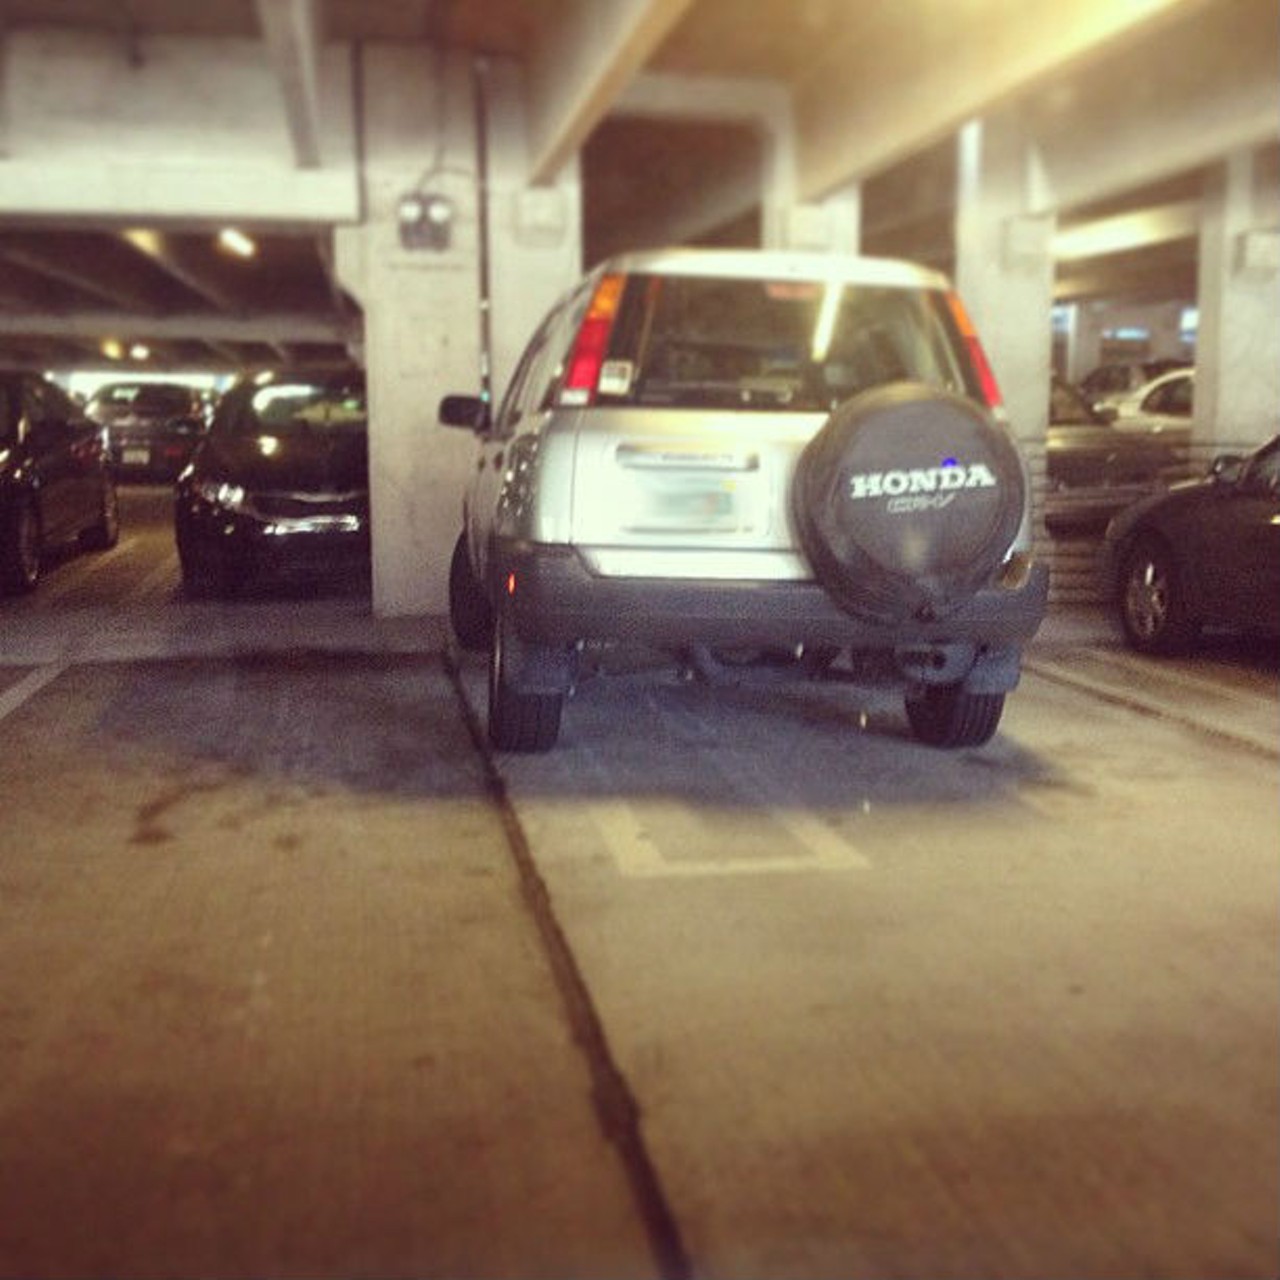 You don't want any door dings on that CRV
"Nice parking, asshole."
Photo via becca_feld